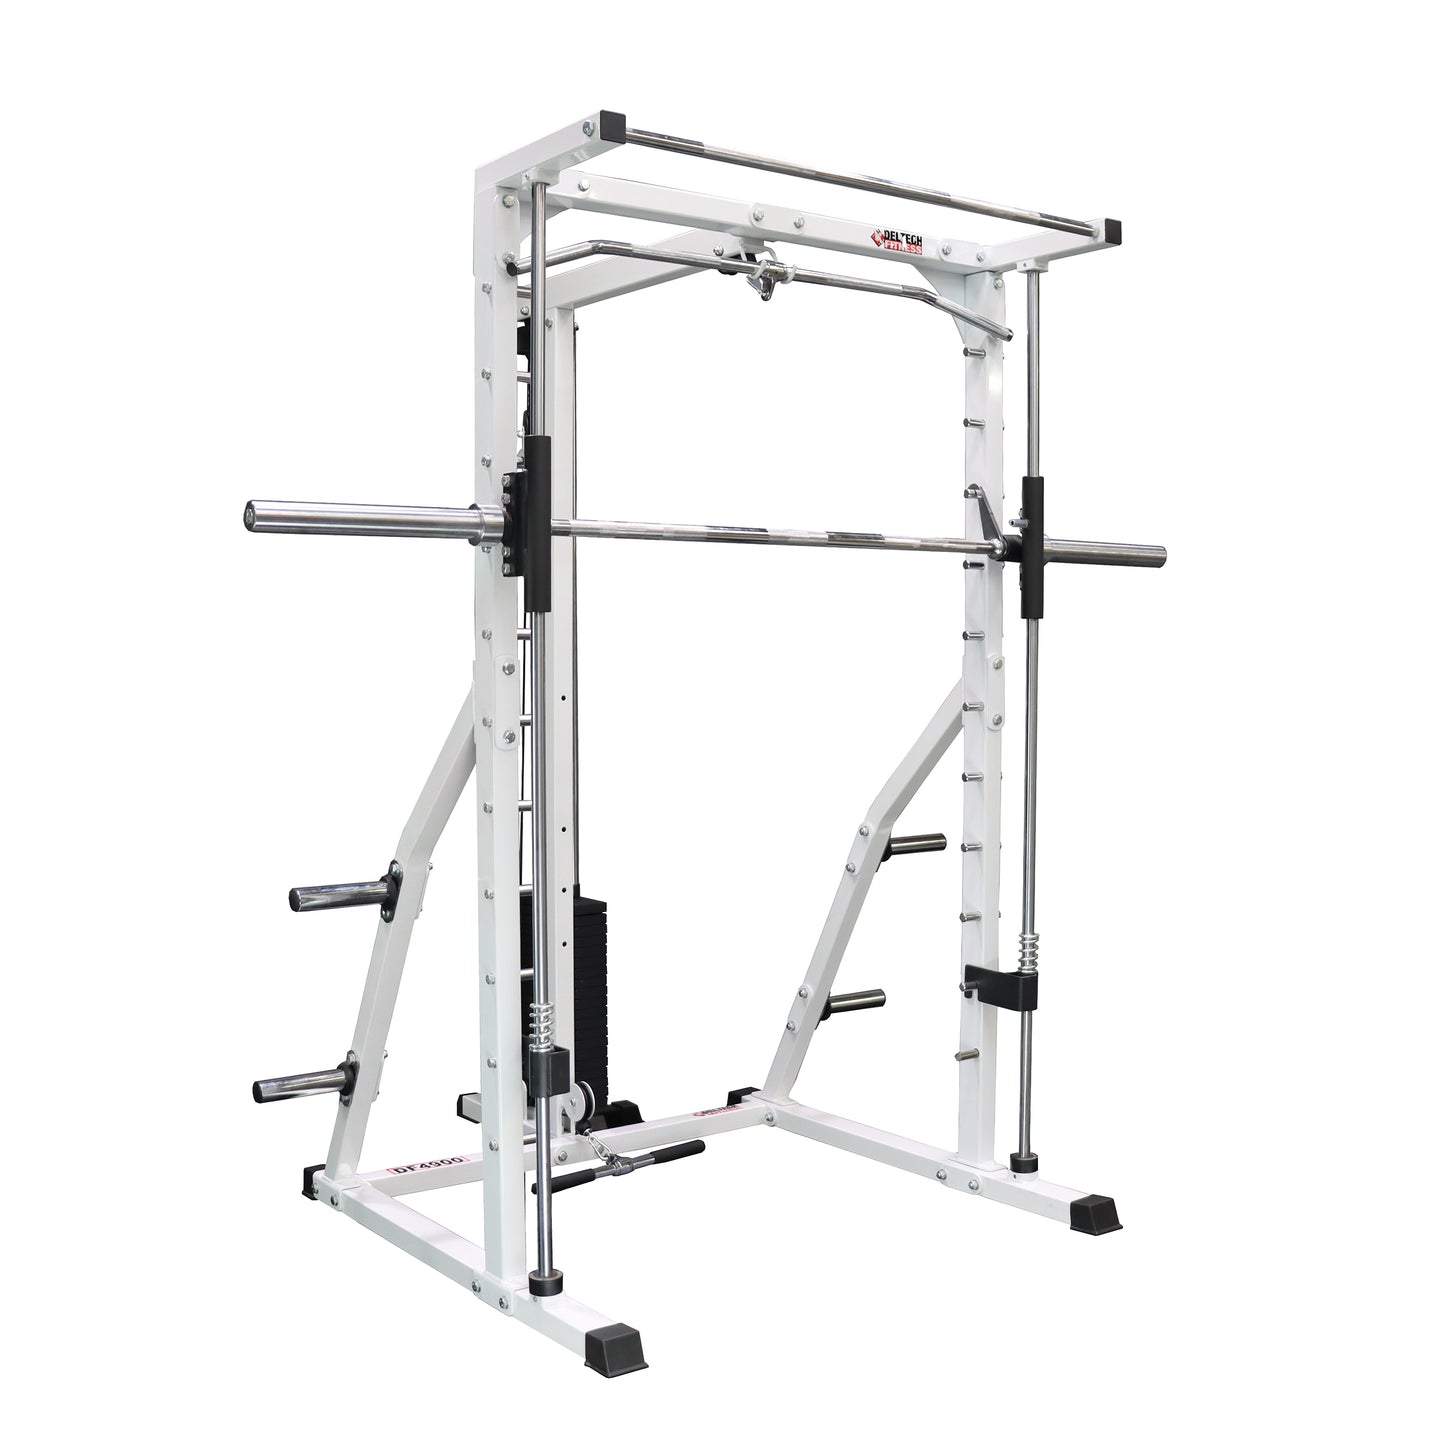 Deltech Fitness Linear Bearing Smith Machine with Weight Stack Loaded Lat Attachment (DF4900LS)